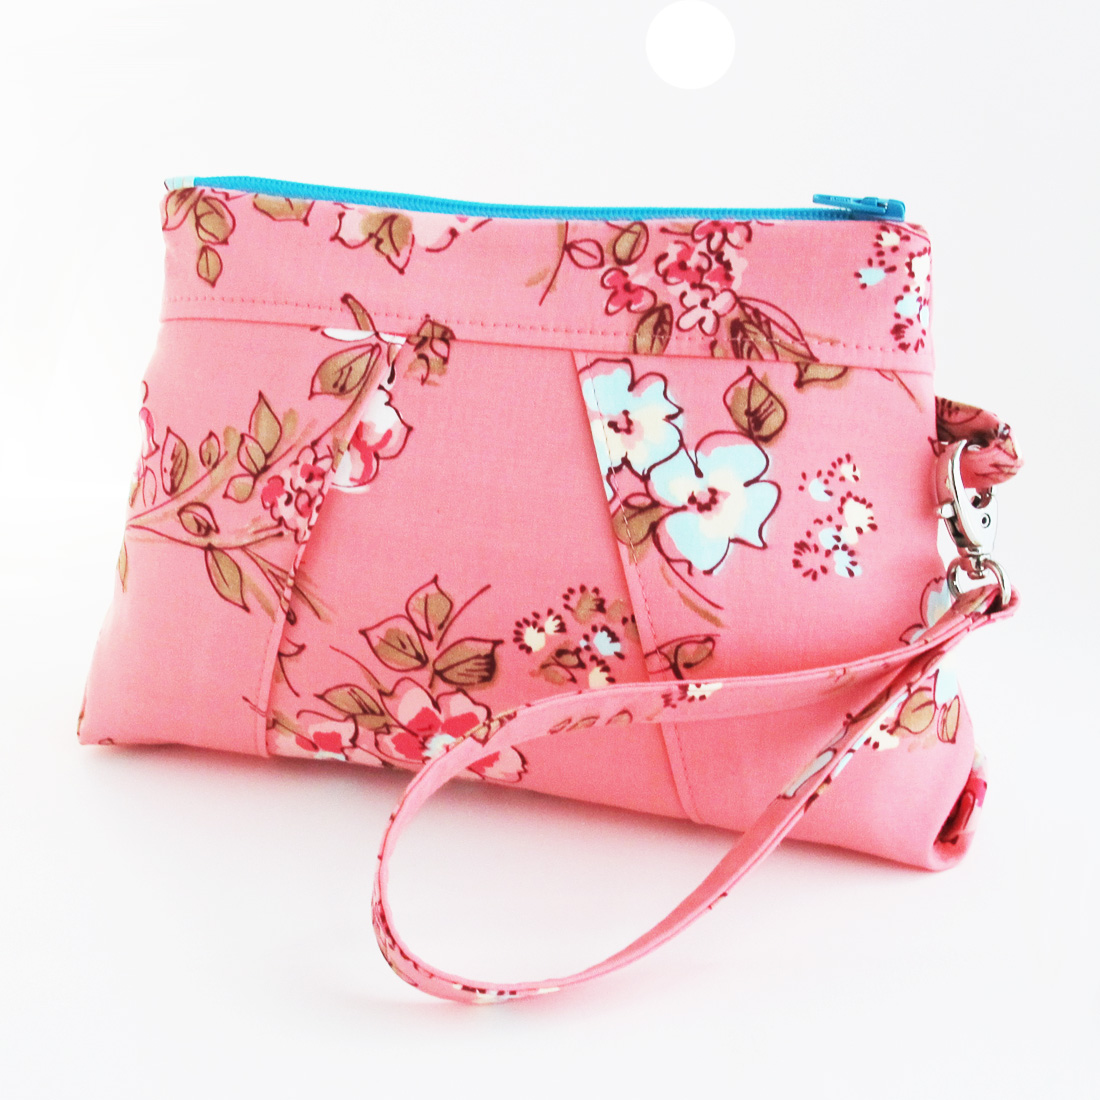 the pink purse has flowers and a blue strap